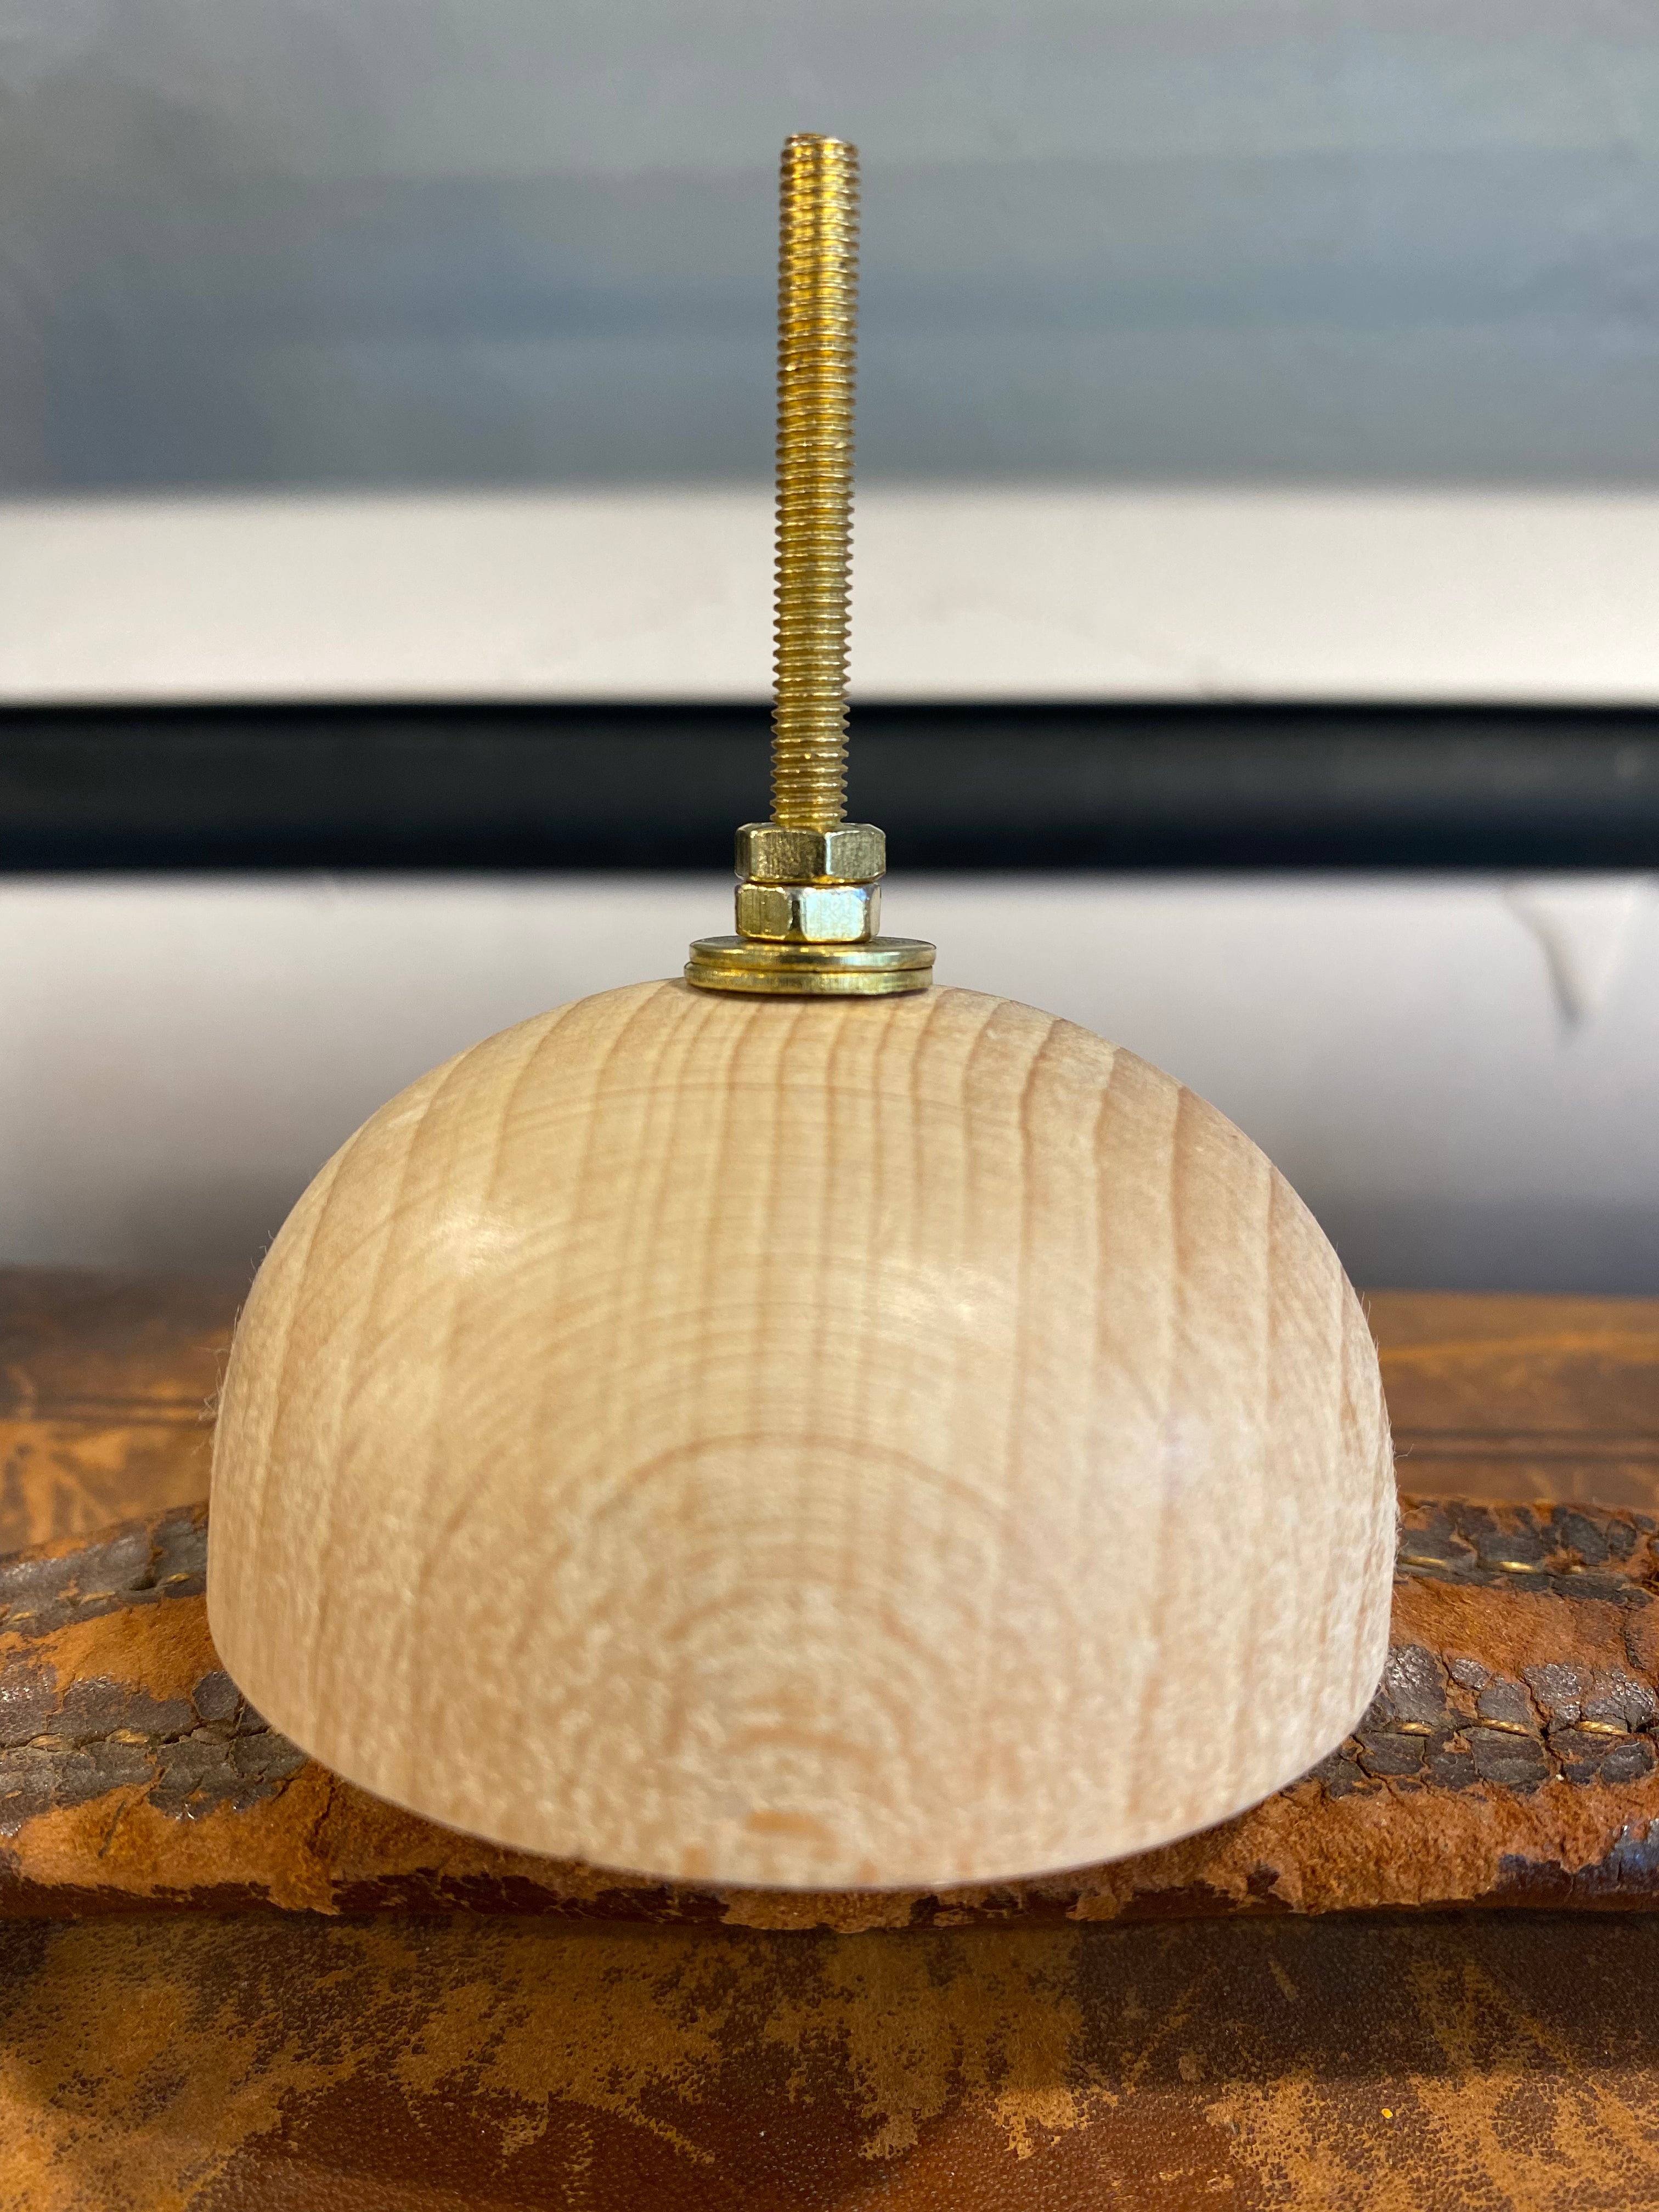 Wooden Knob With Metal Inlay The Mustard Seed Collection, The Seed